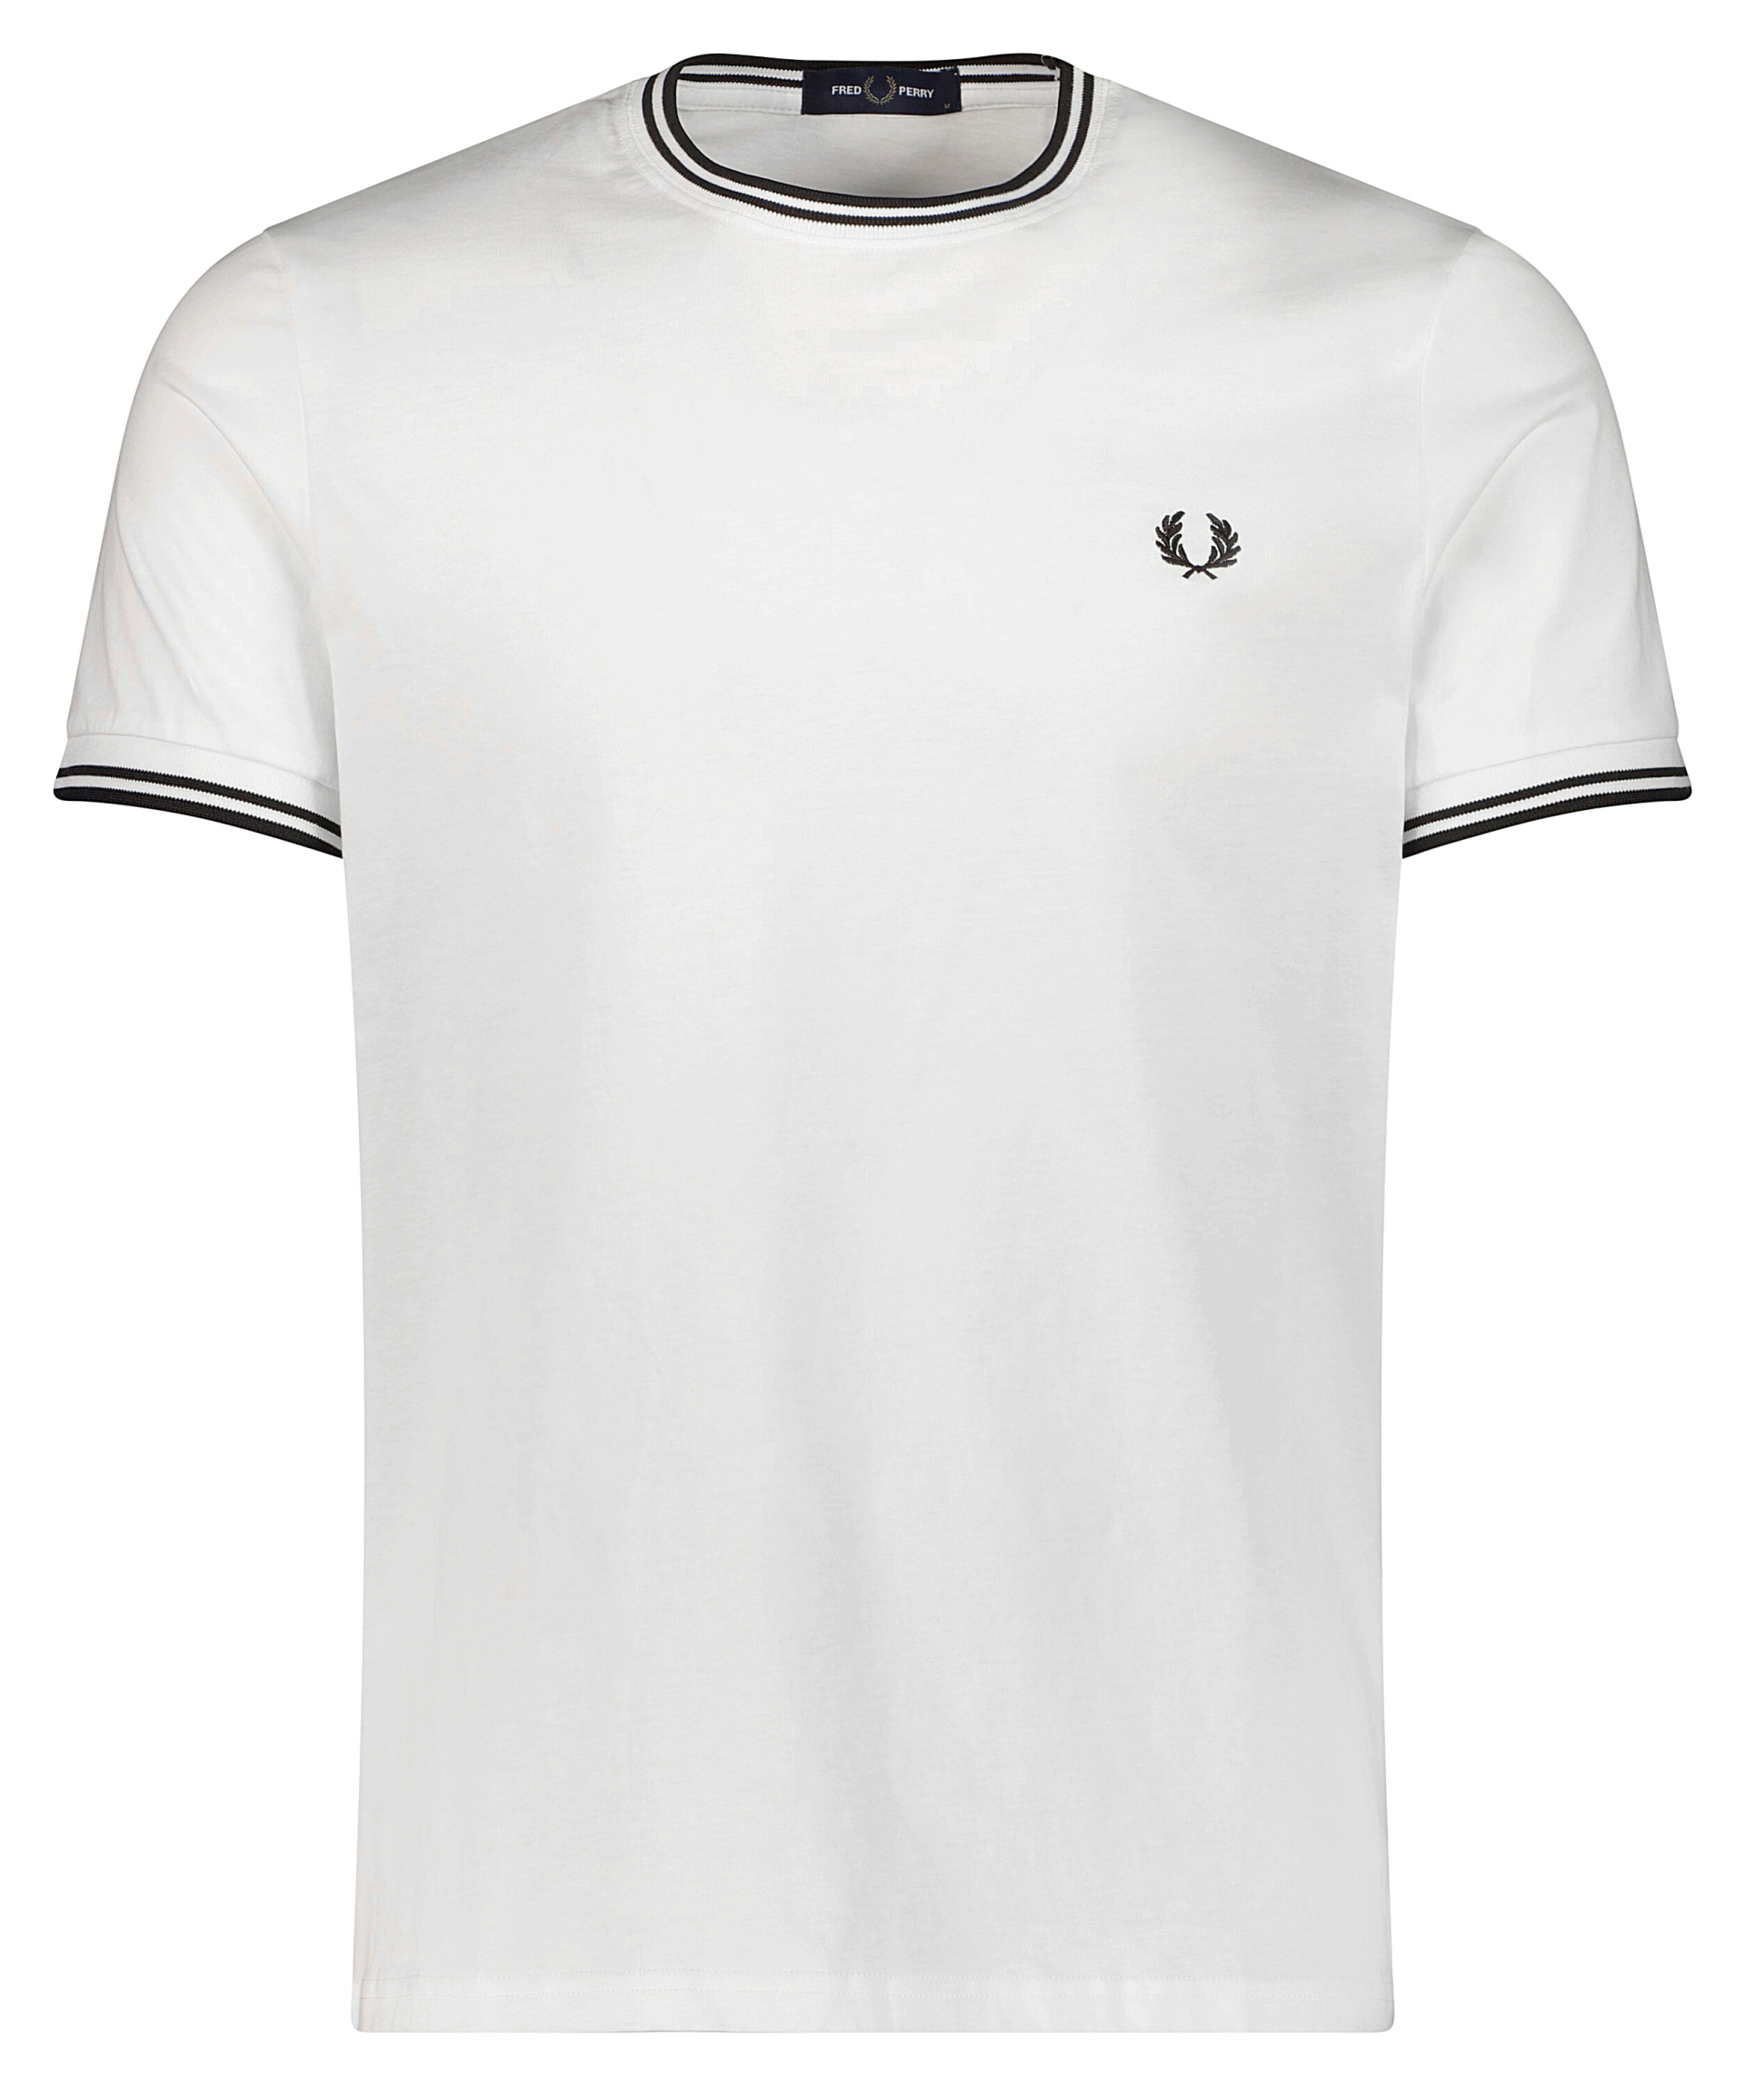 Fred Perry T-shirt hvid / 100 white